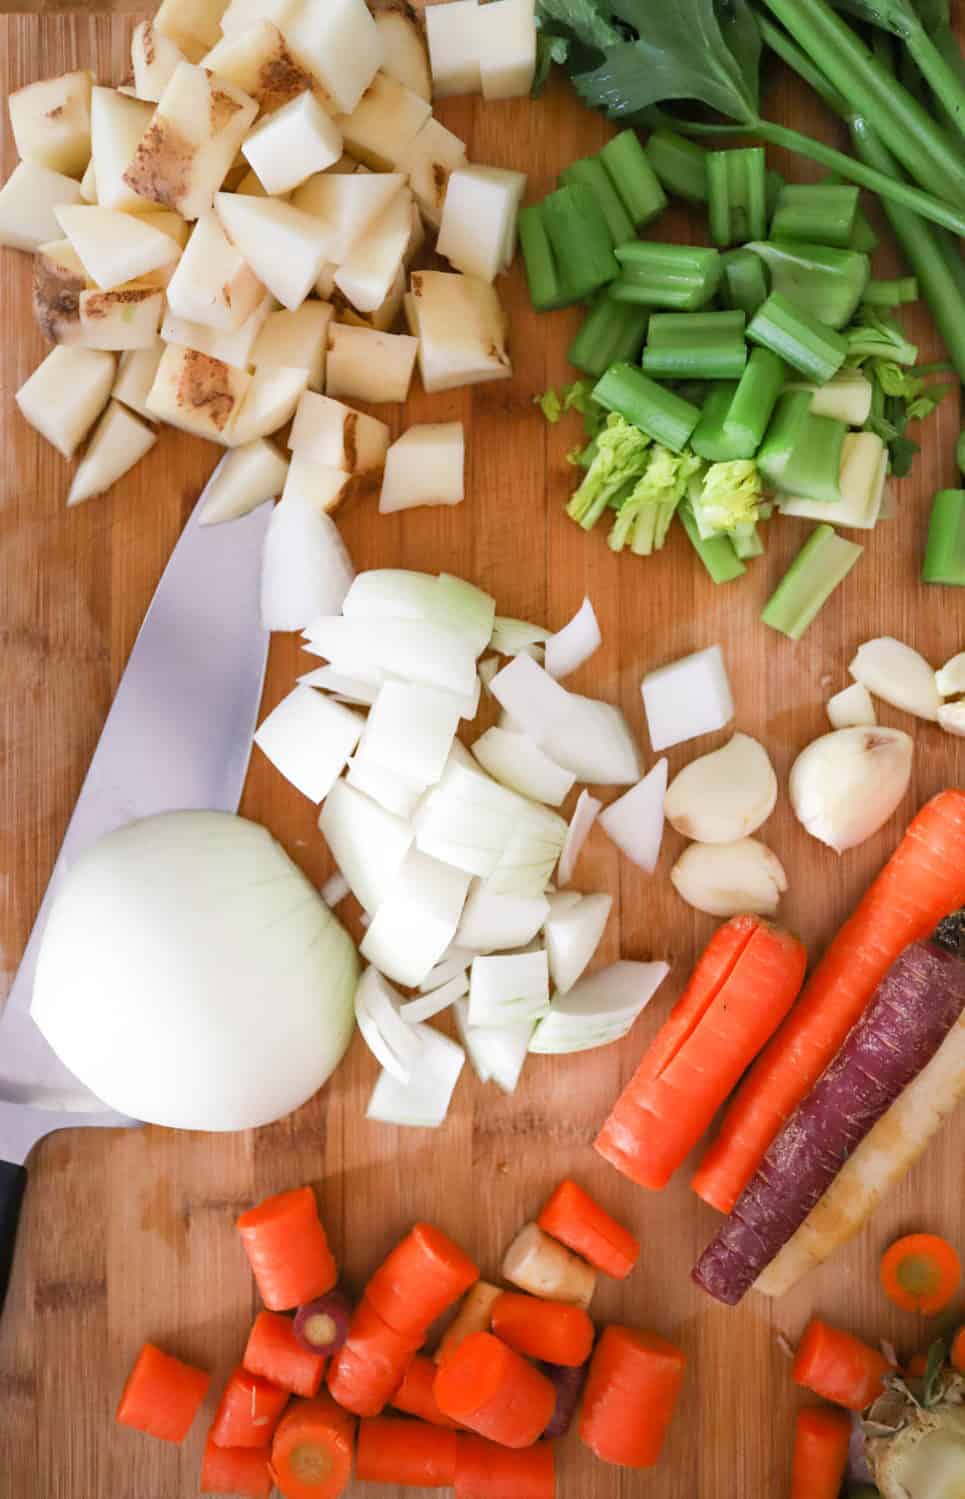 chopped up veggies for beef stew.